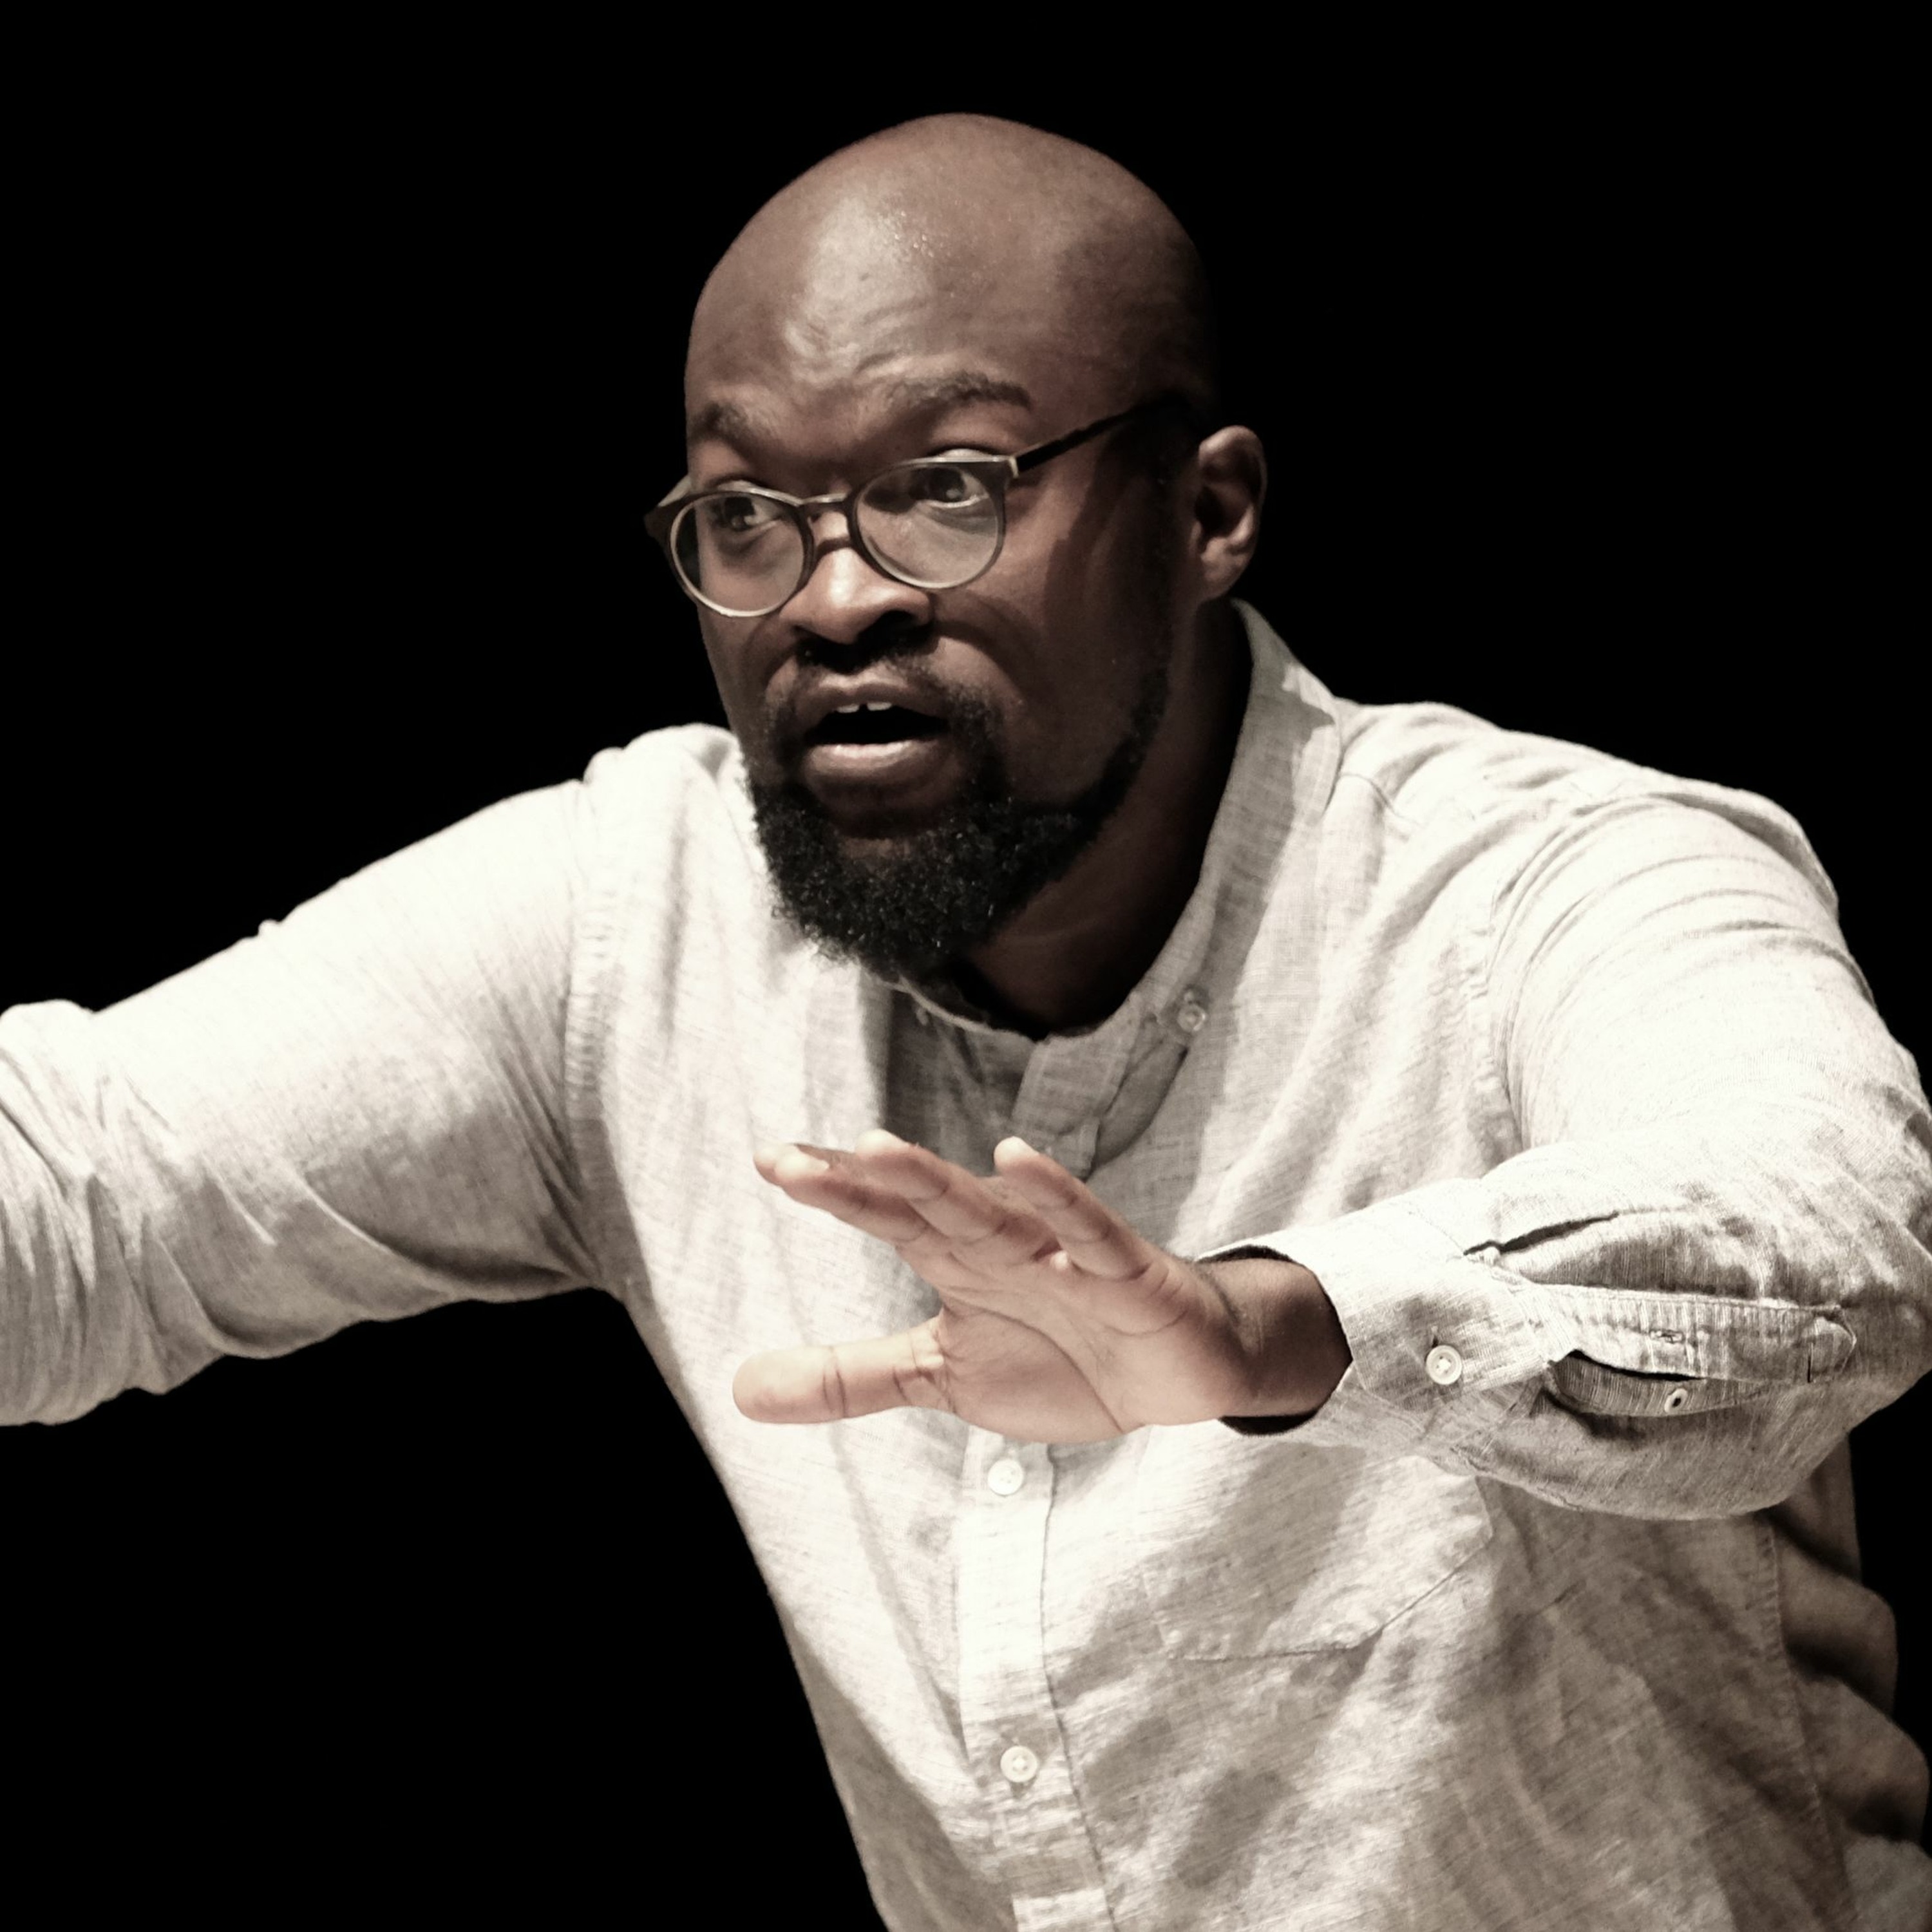 Vimbayi Kaziboni Brings Contemporary African Works to Center Stage